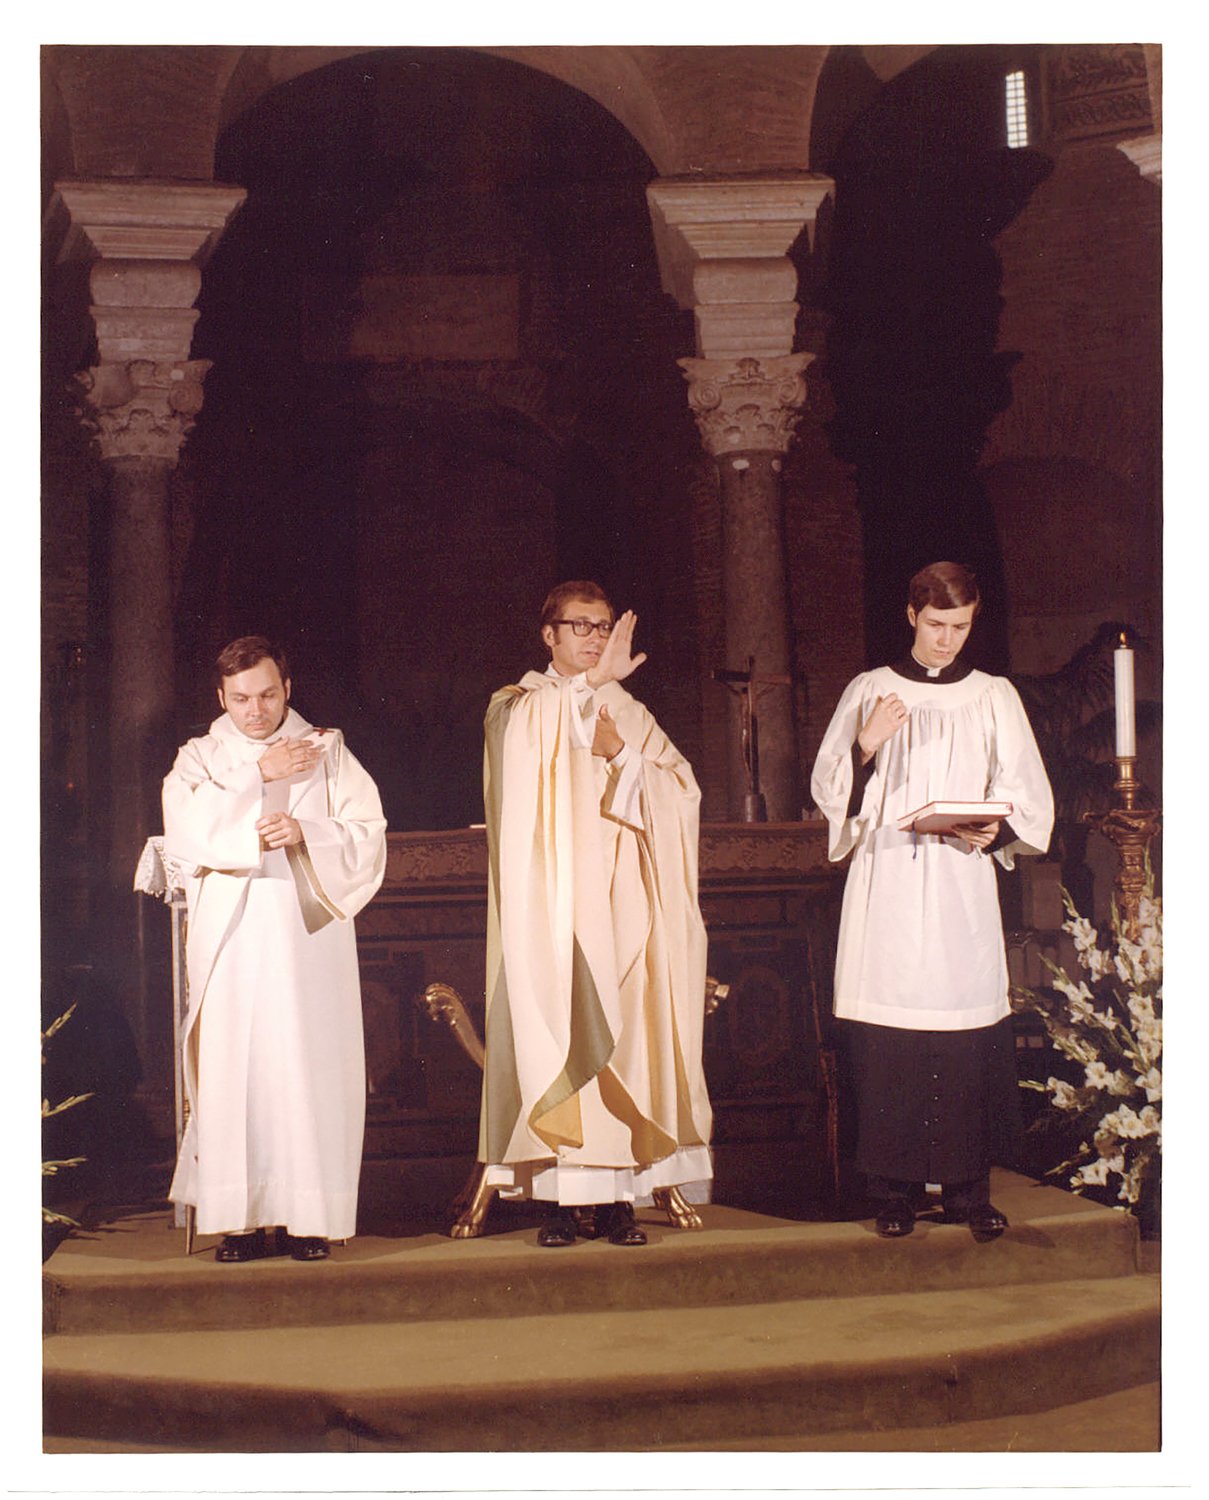 Then Father Robert C. Evans offers a blessing at his first Mass after he was ordained to the priesthood in 1973.